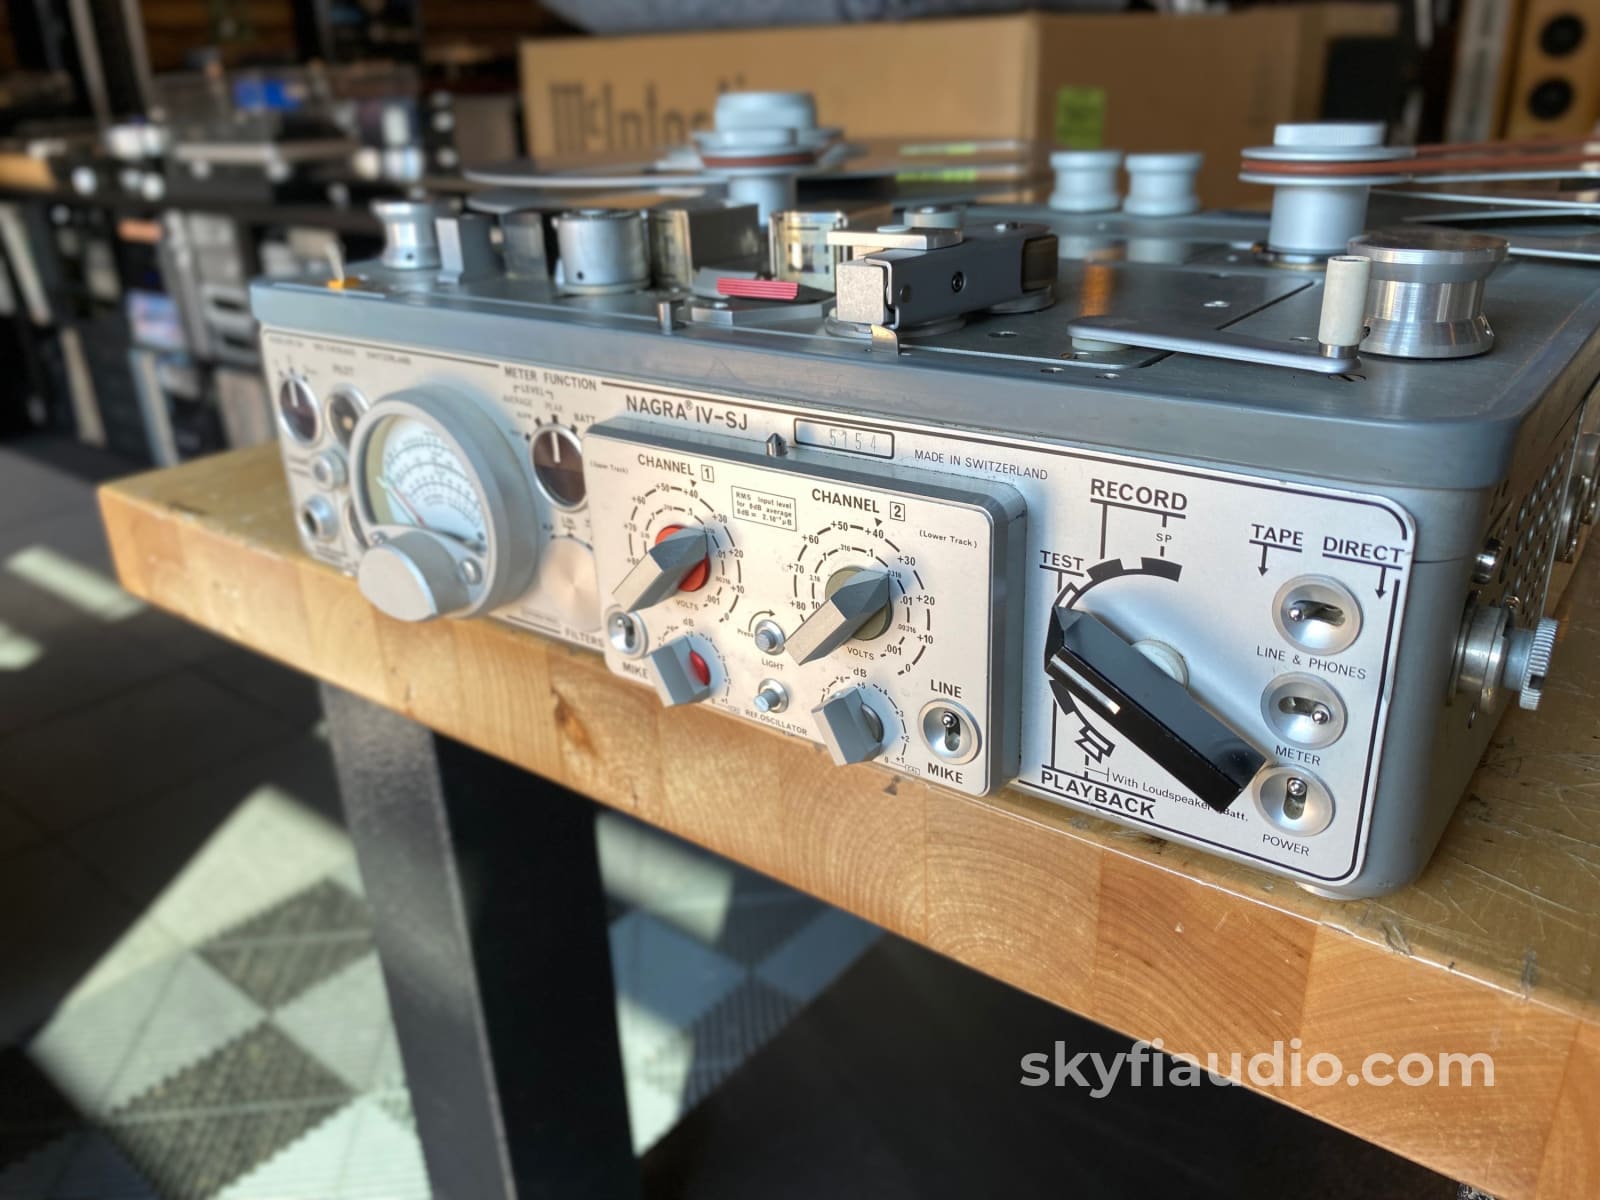 Nagra IV-SJ Reel to Reel with Accessories and 10 Adapters